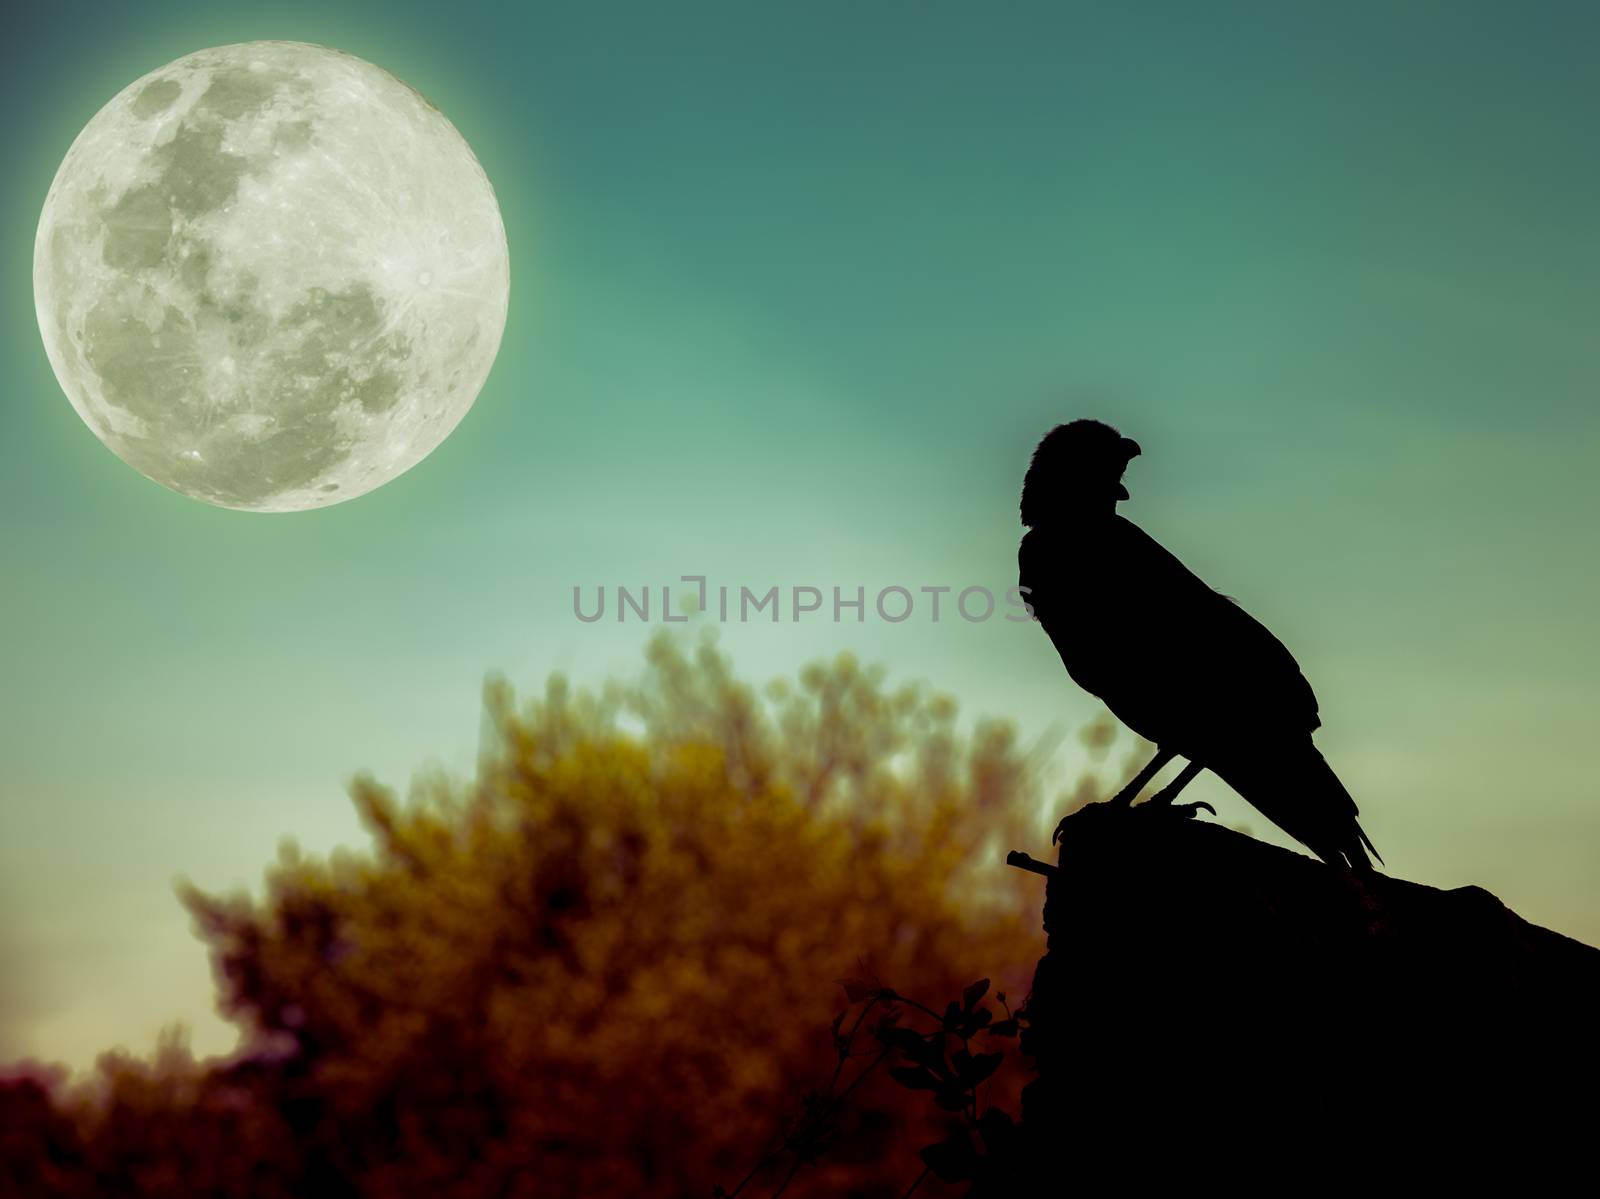 Night sky with full moon, tree and silhouette of crow that can b by kdshutterman